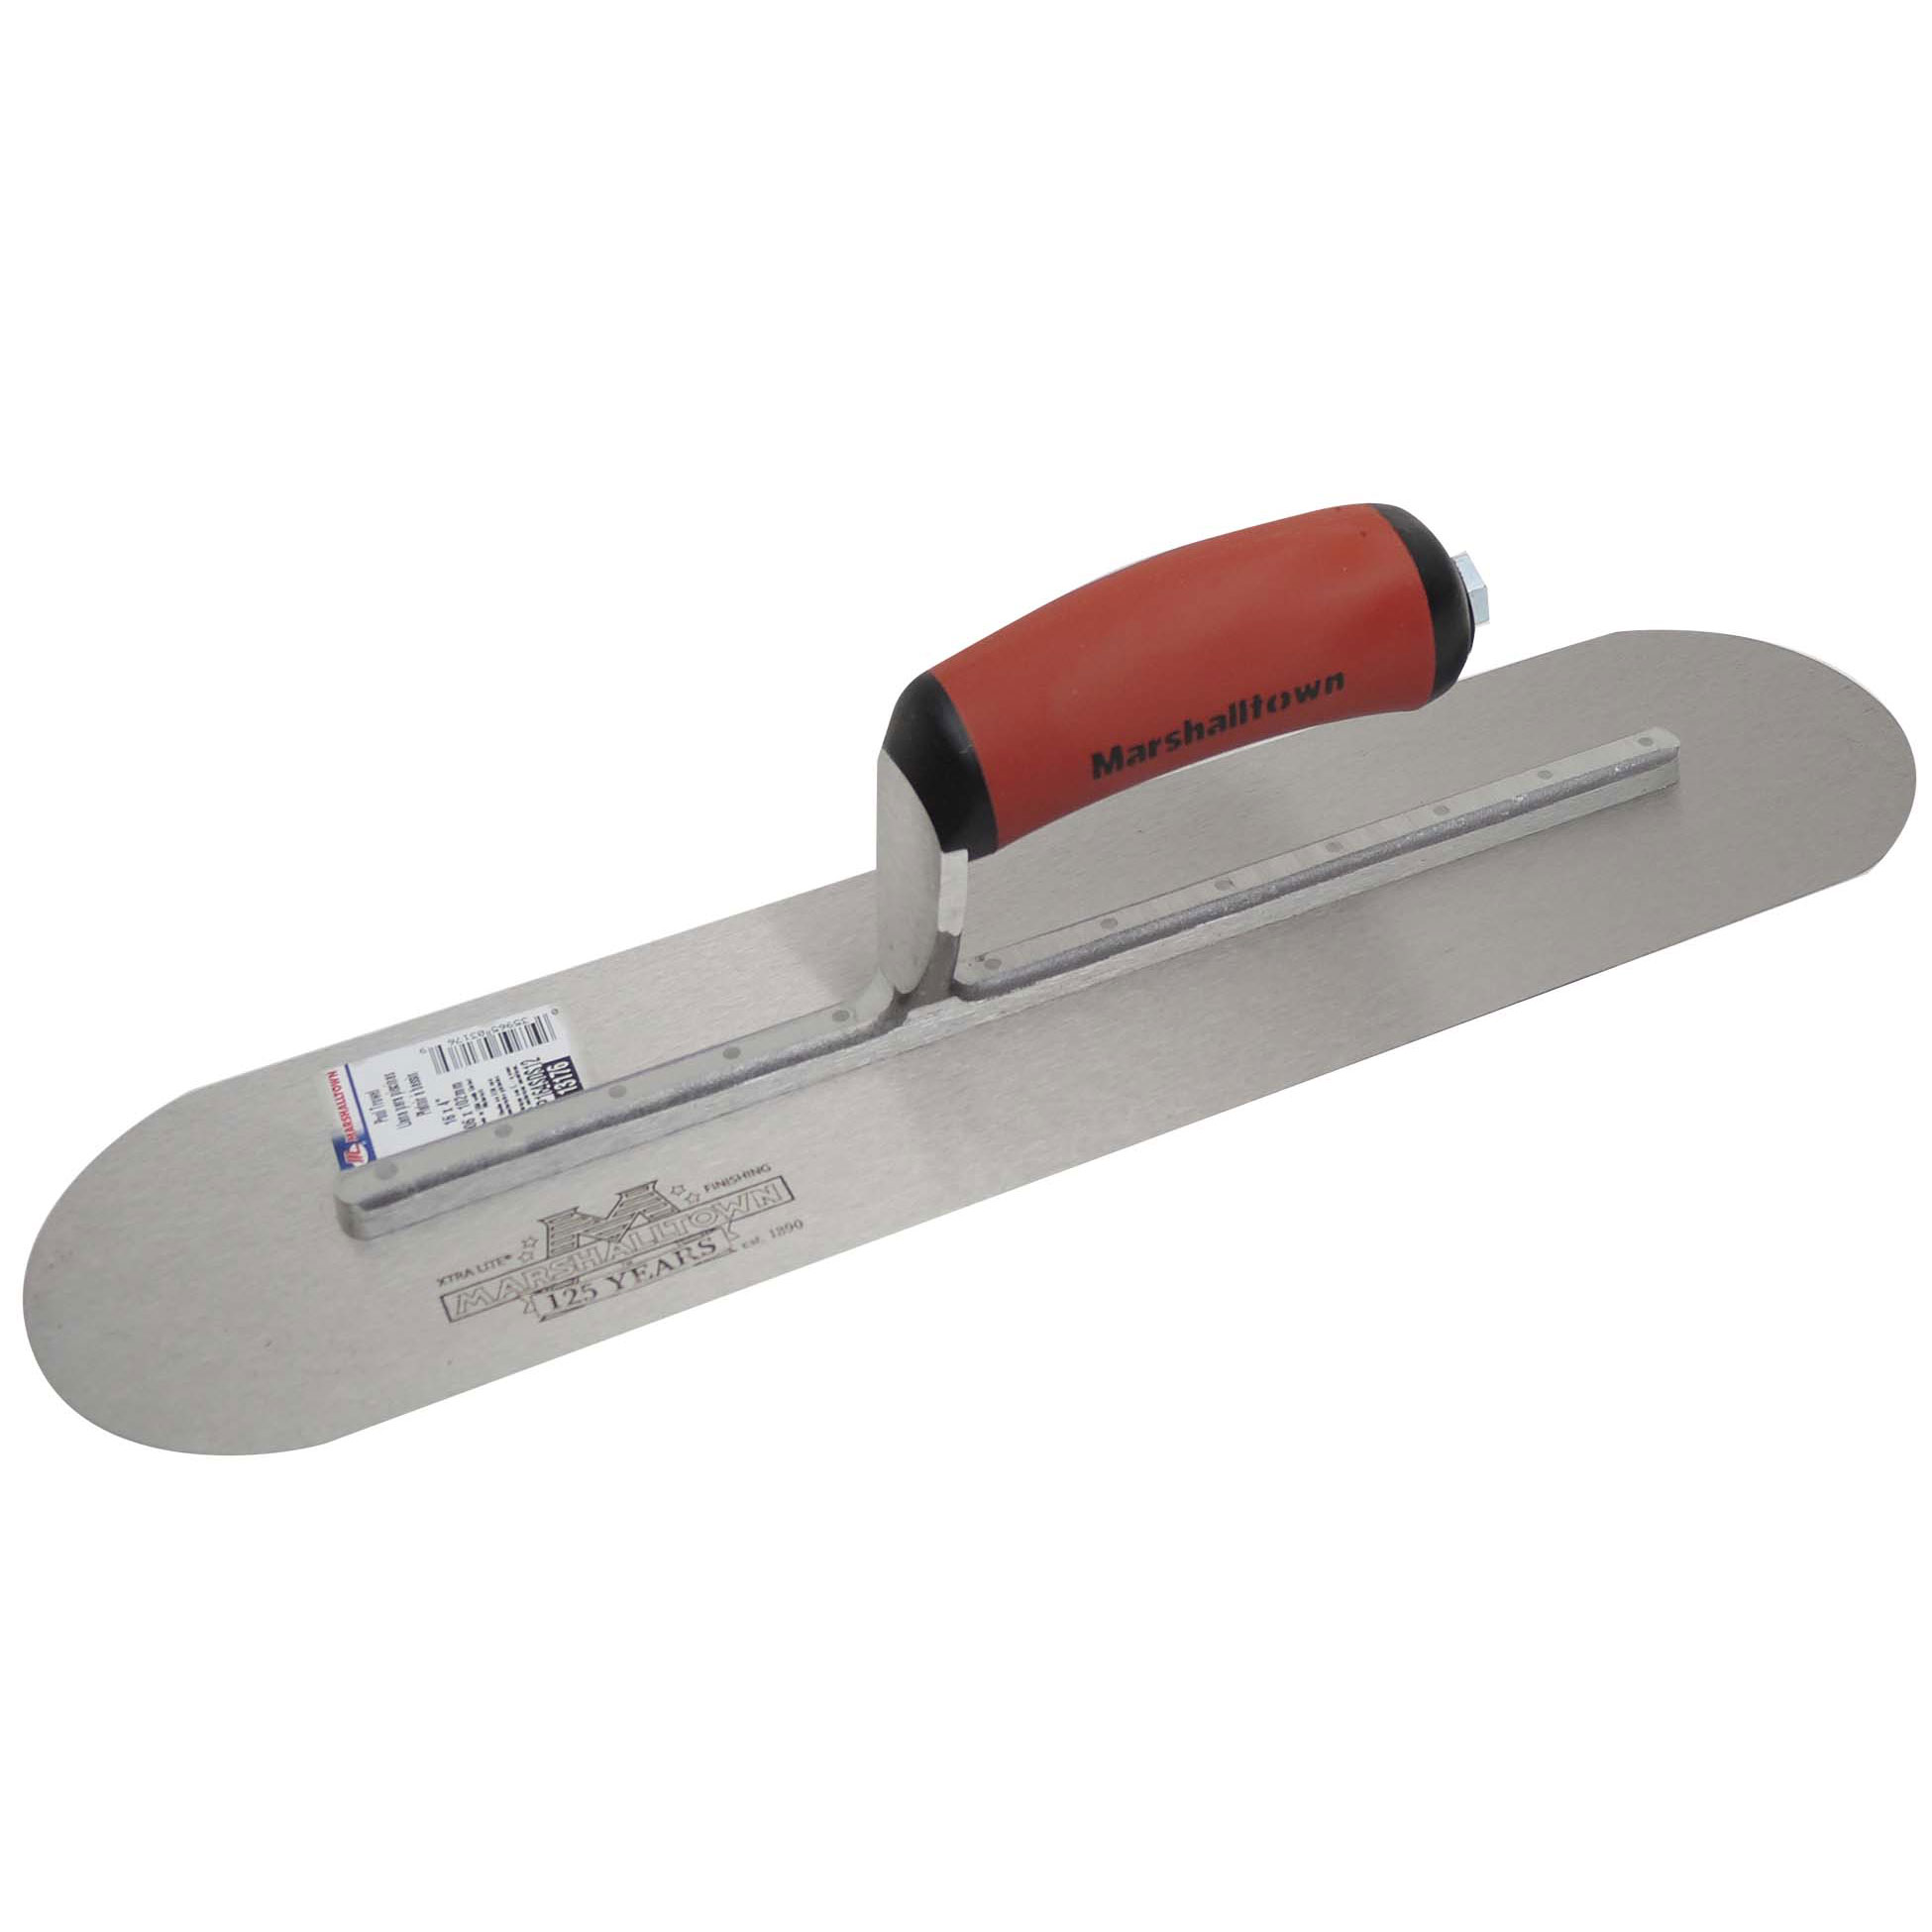 Marshalltown SP164SDS12 16in x 4in Pool Trowel with 12 Rivets and DuraSoft Handle SP164SDS12